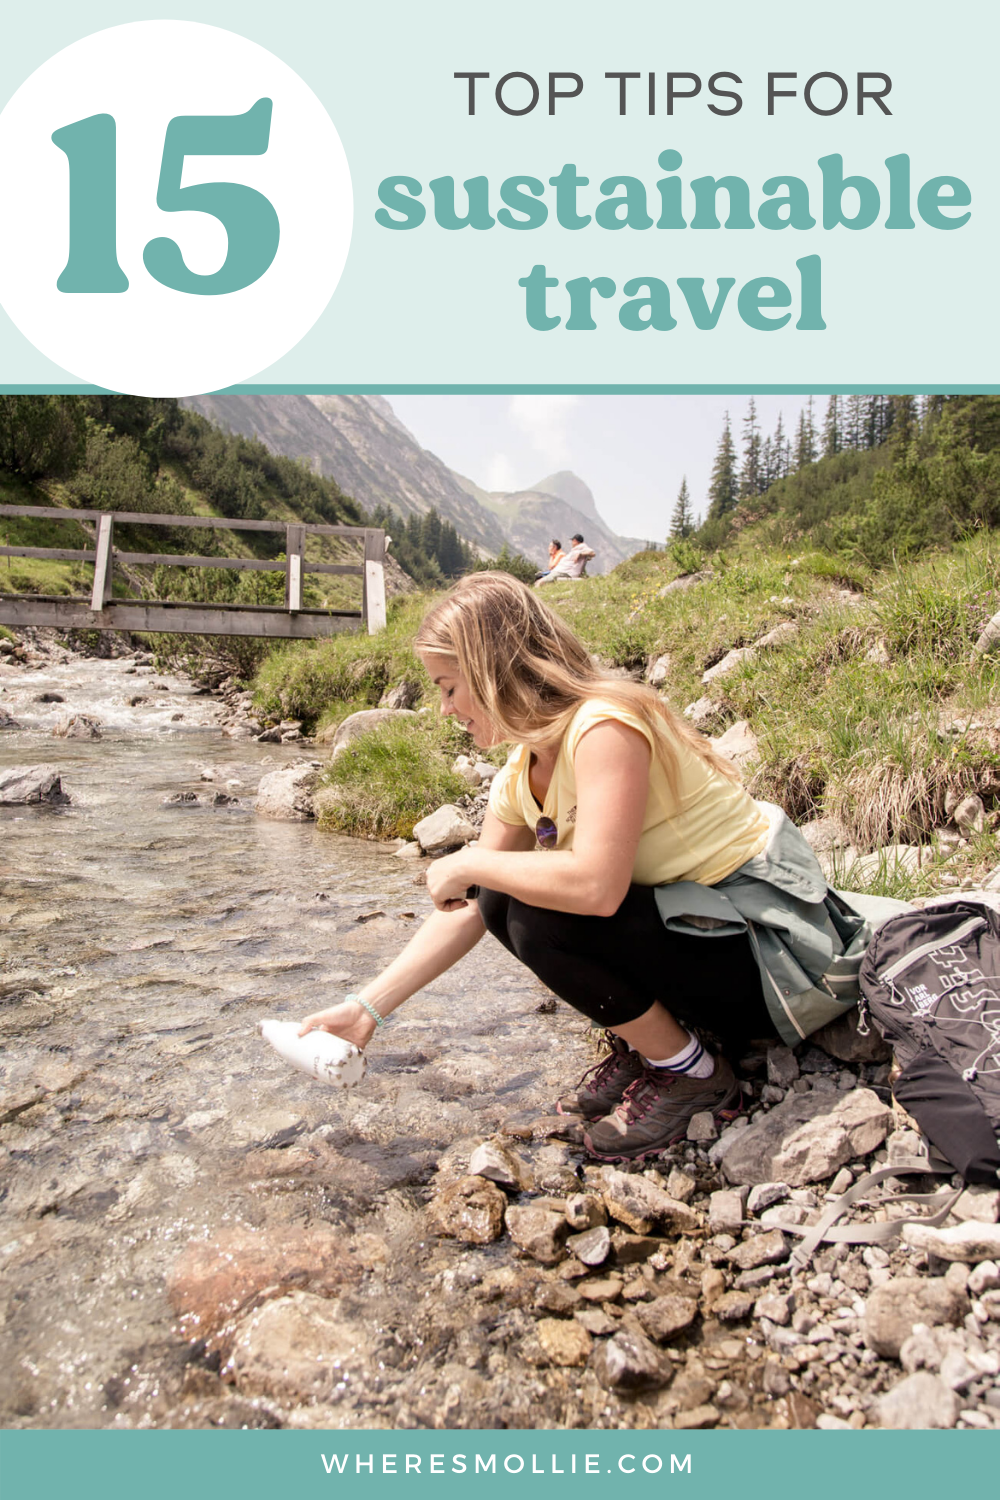 15 top tips for sustainable travel